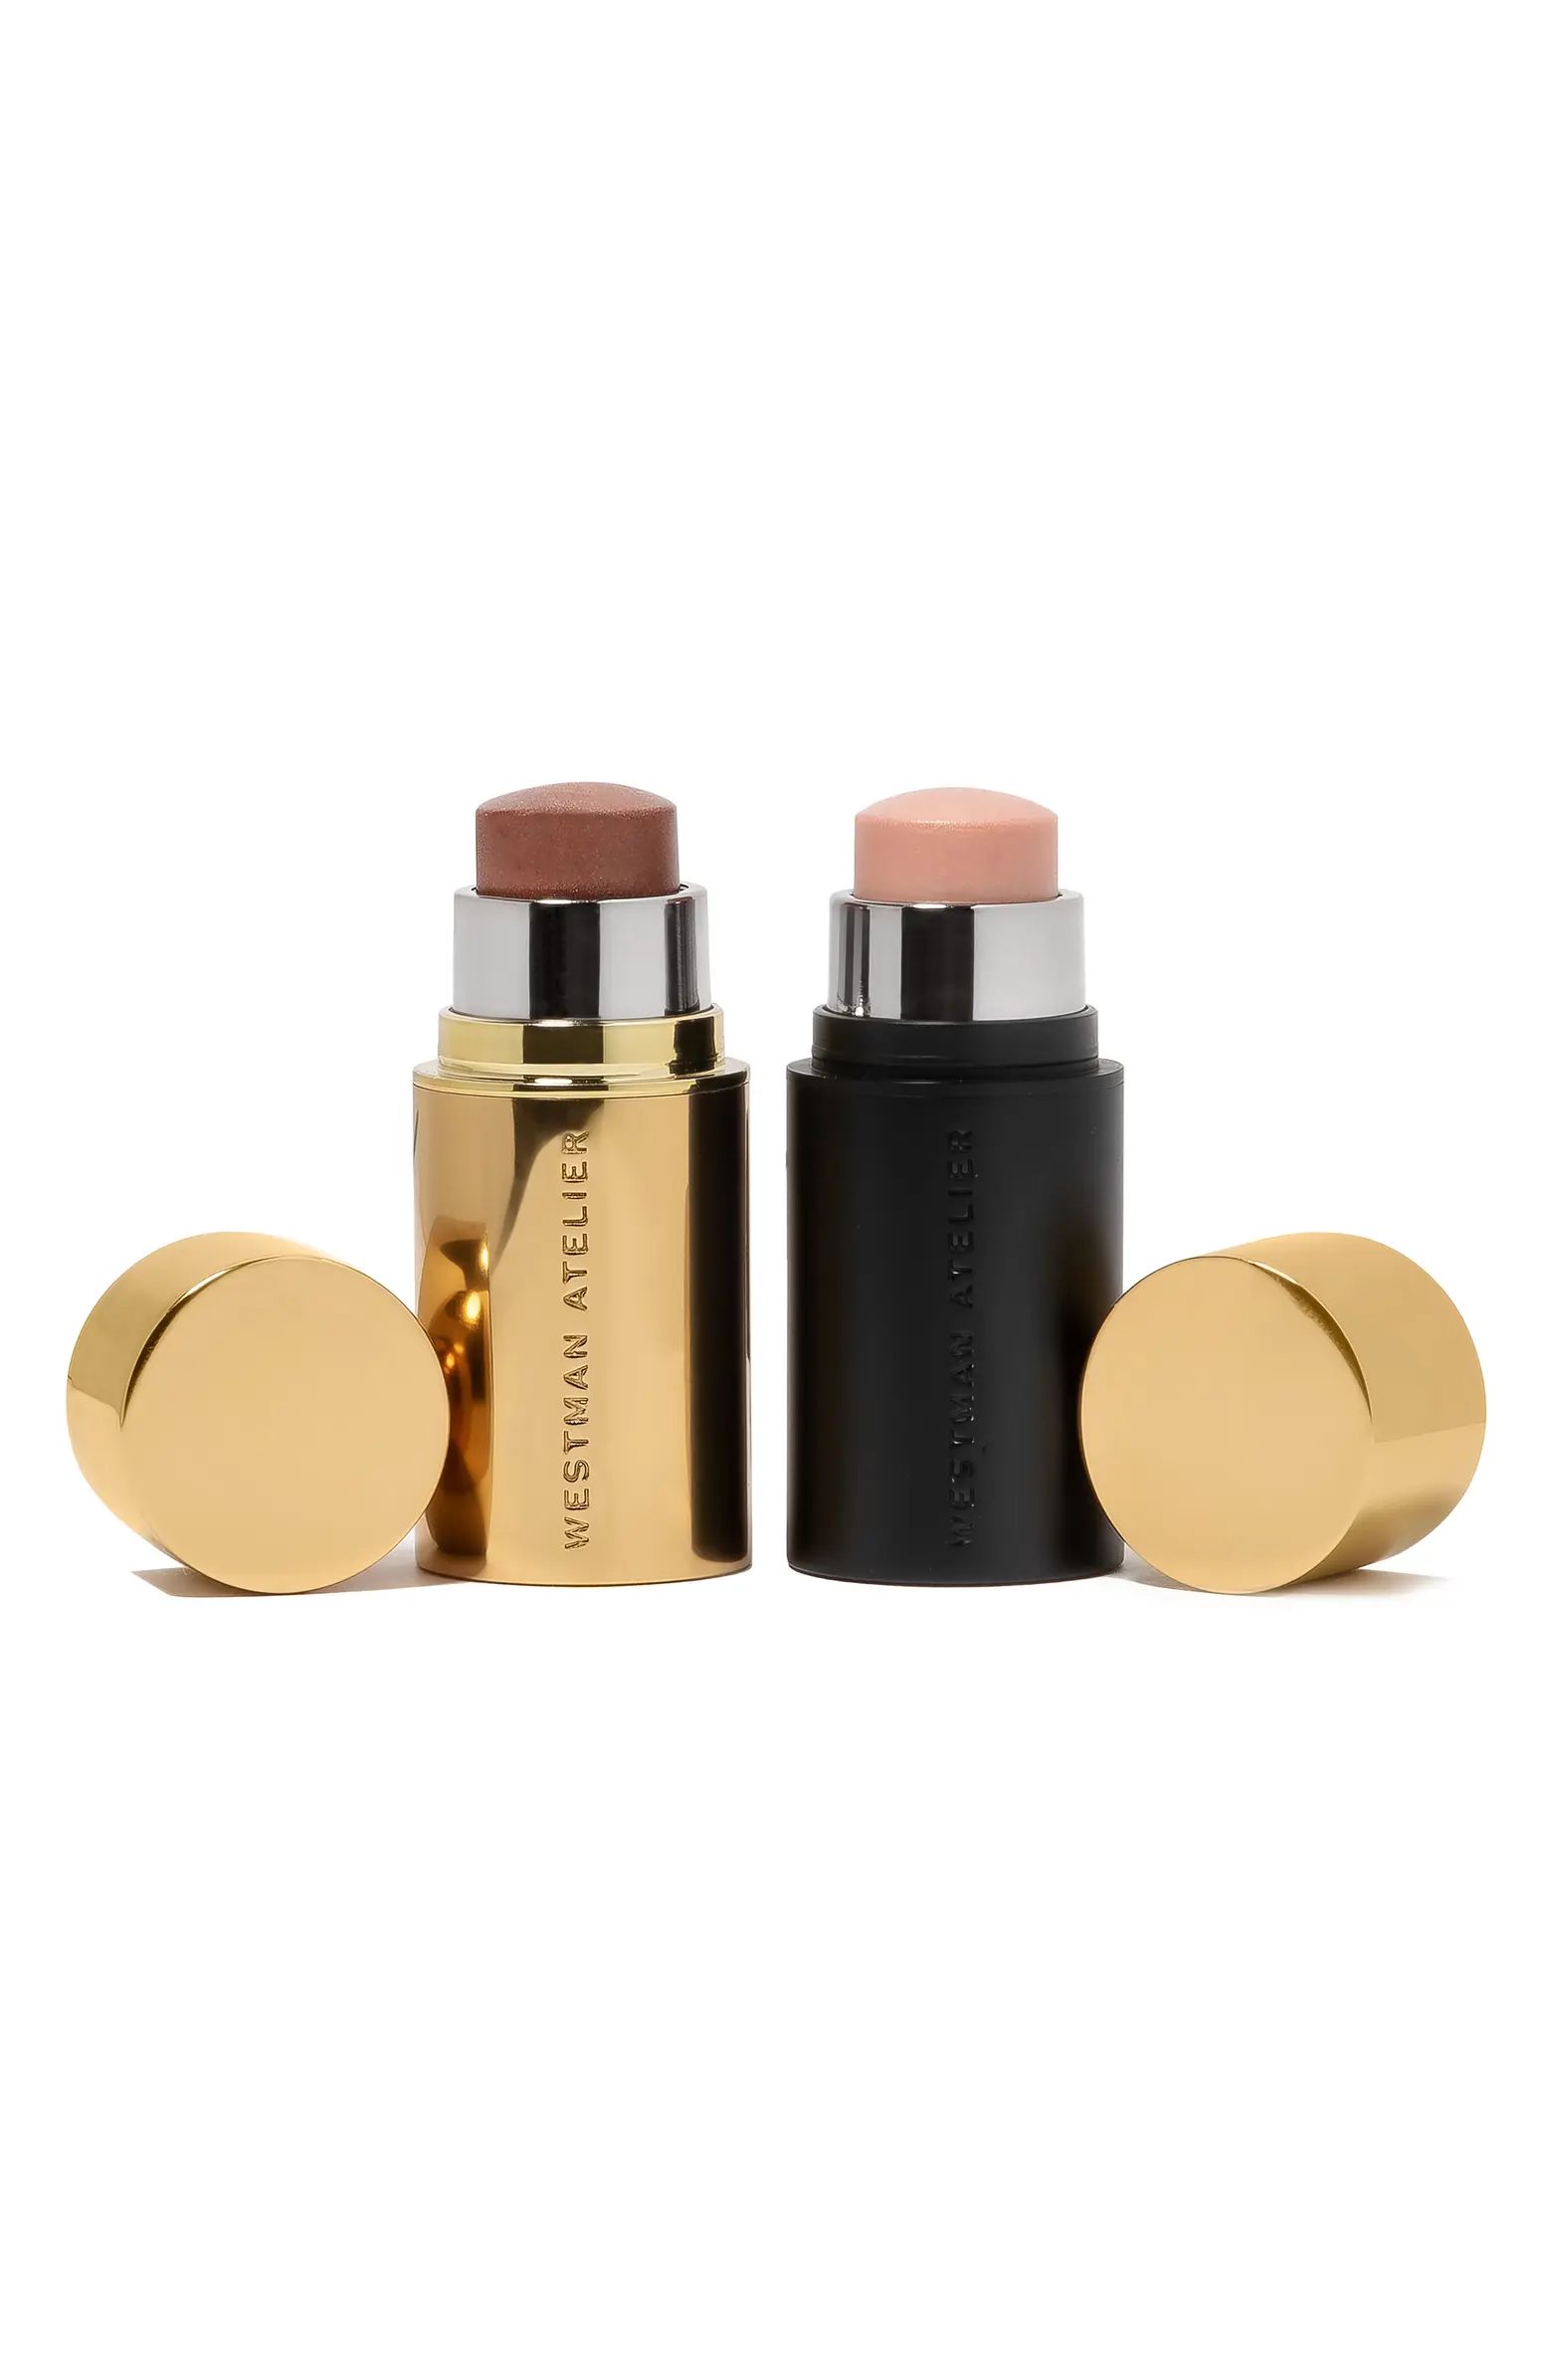 Petite Lit Up Highlight Stick Duo $52 Value | Nordstrom